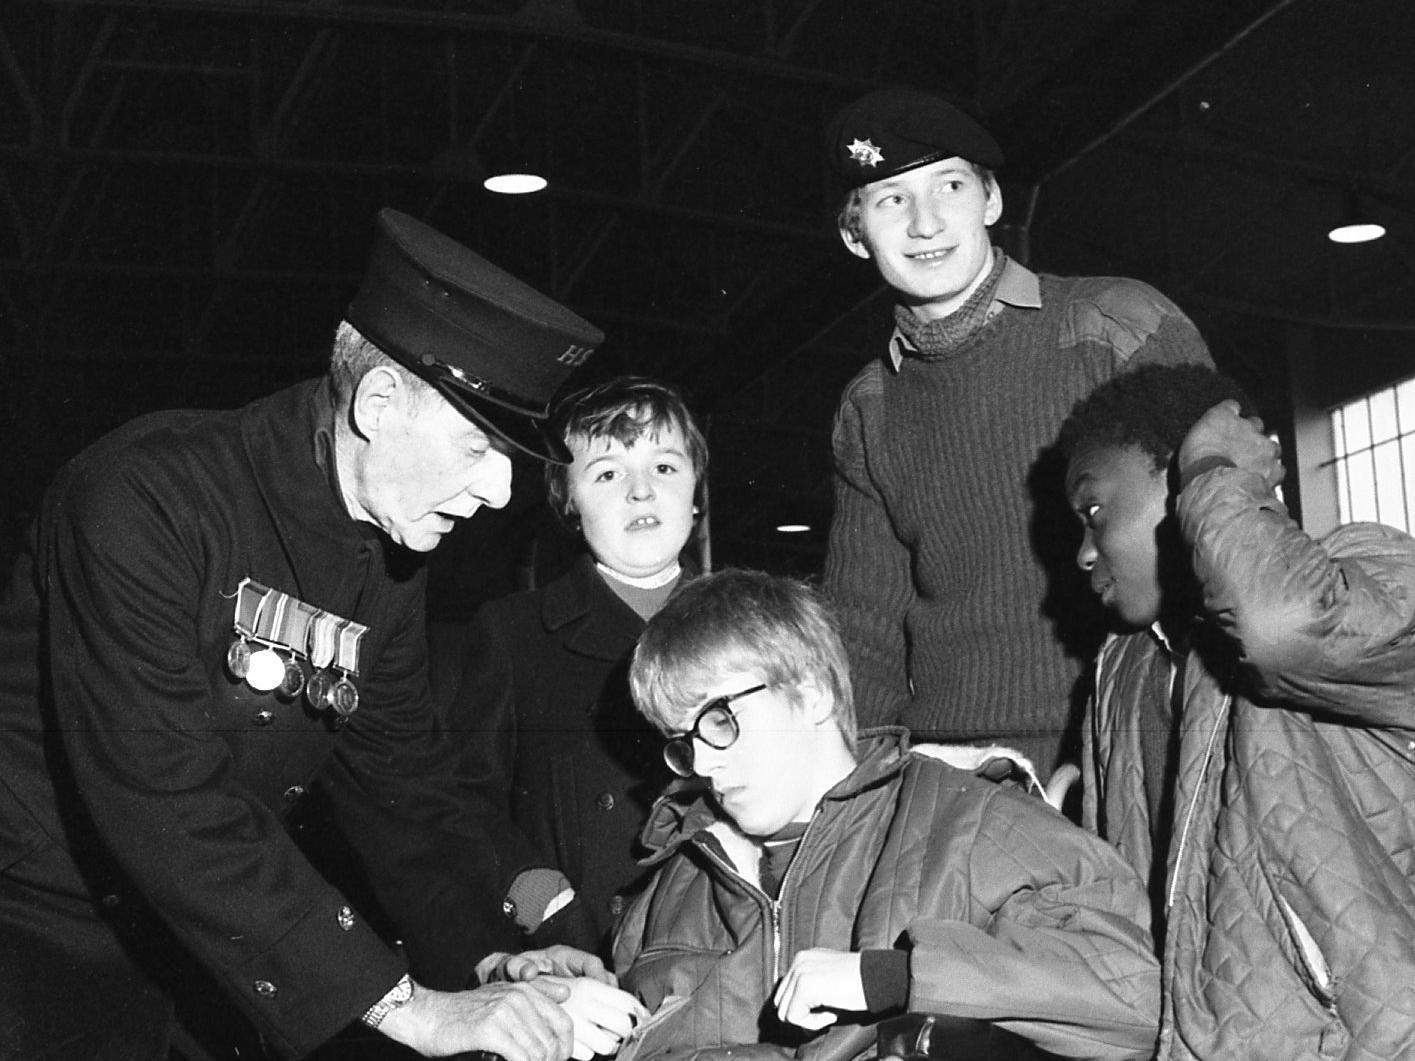 A scene from an event at Weeton Camp in November 23 1974